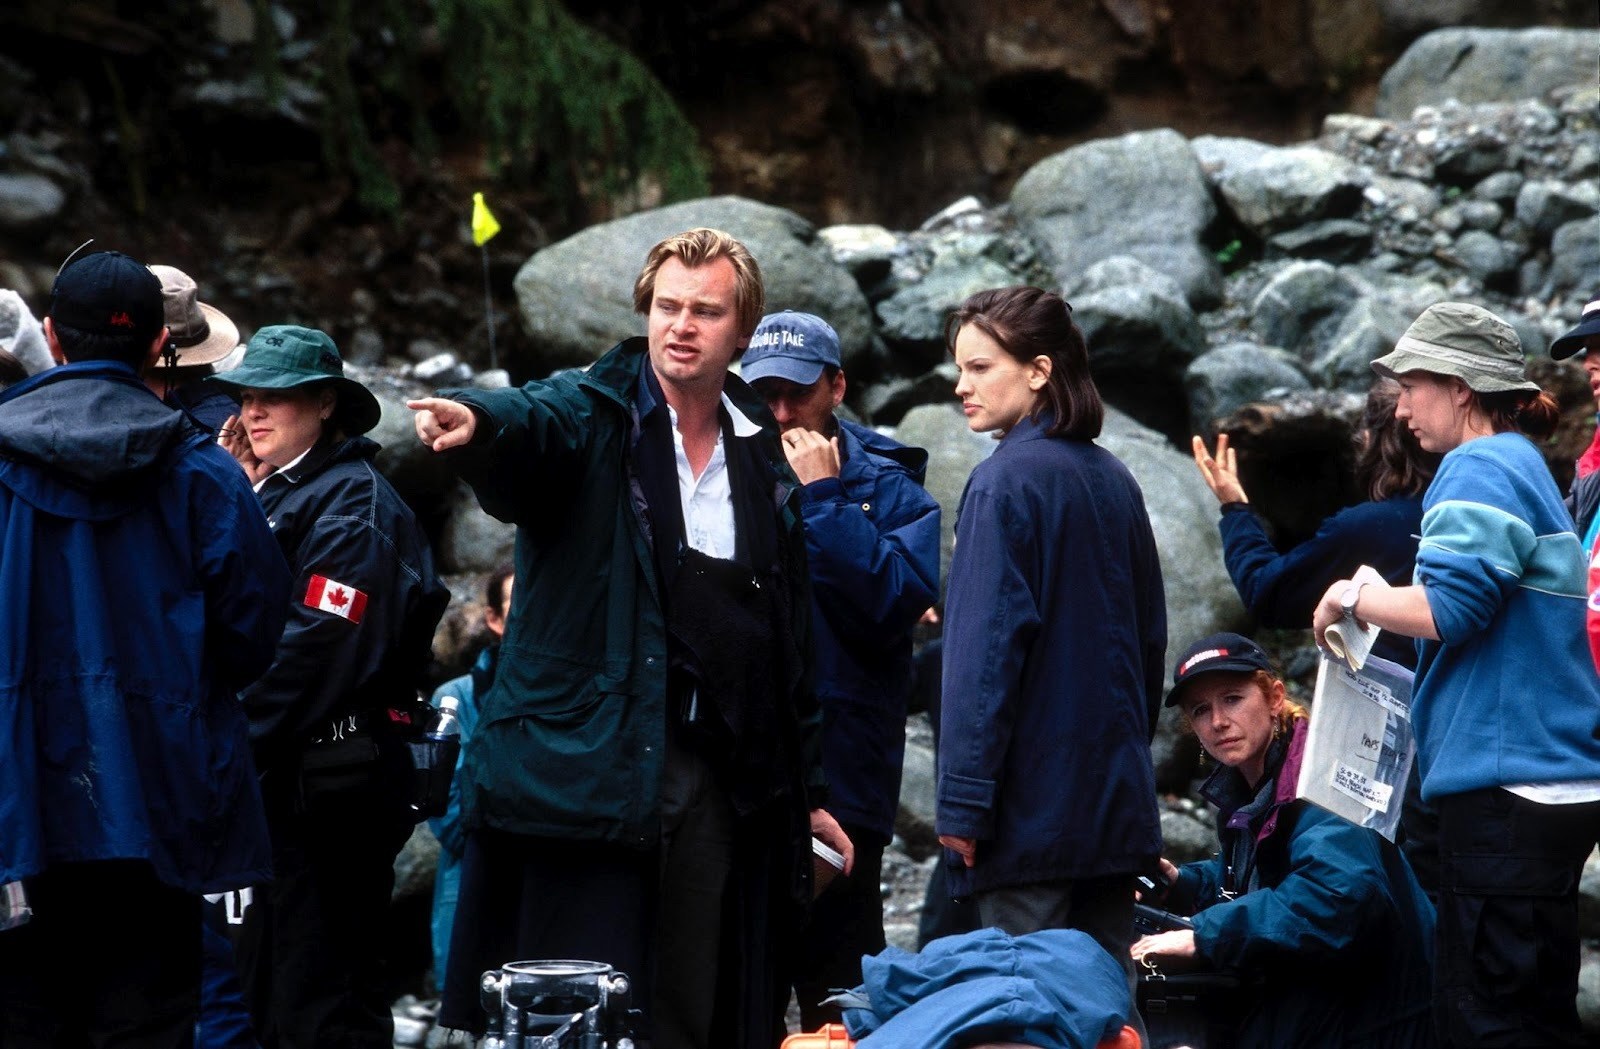 Insomnia (2002) Behind the Scenes